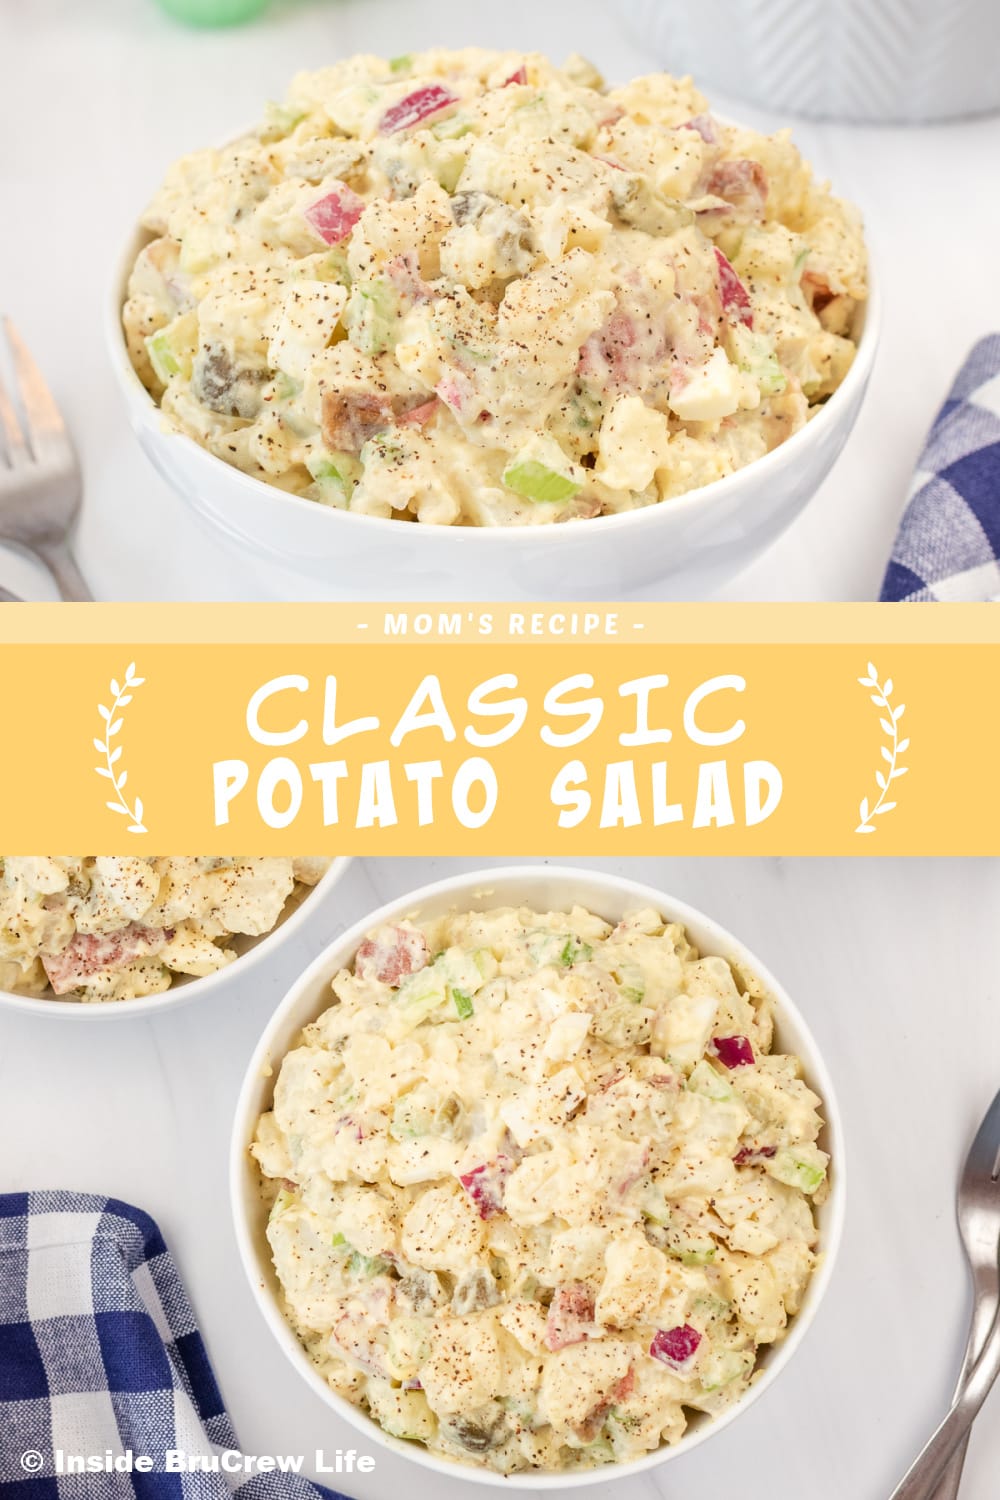 Two pictures of mom's potato salad collaged together with a yellow text box.